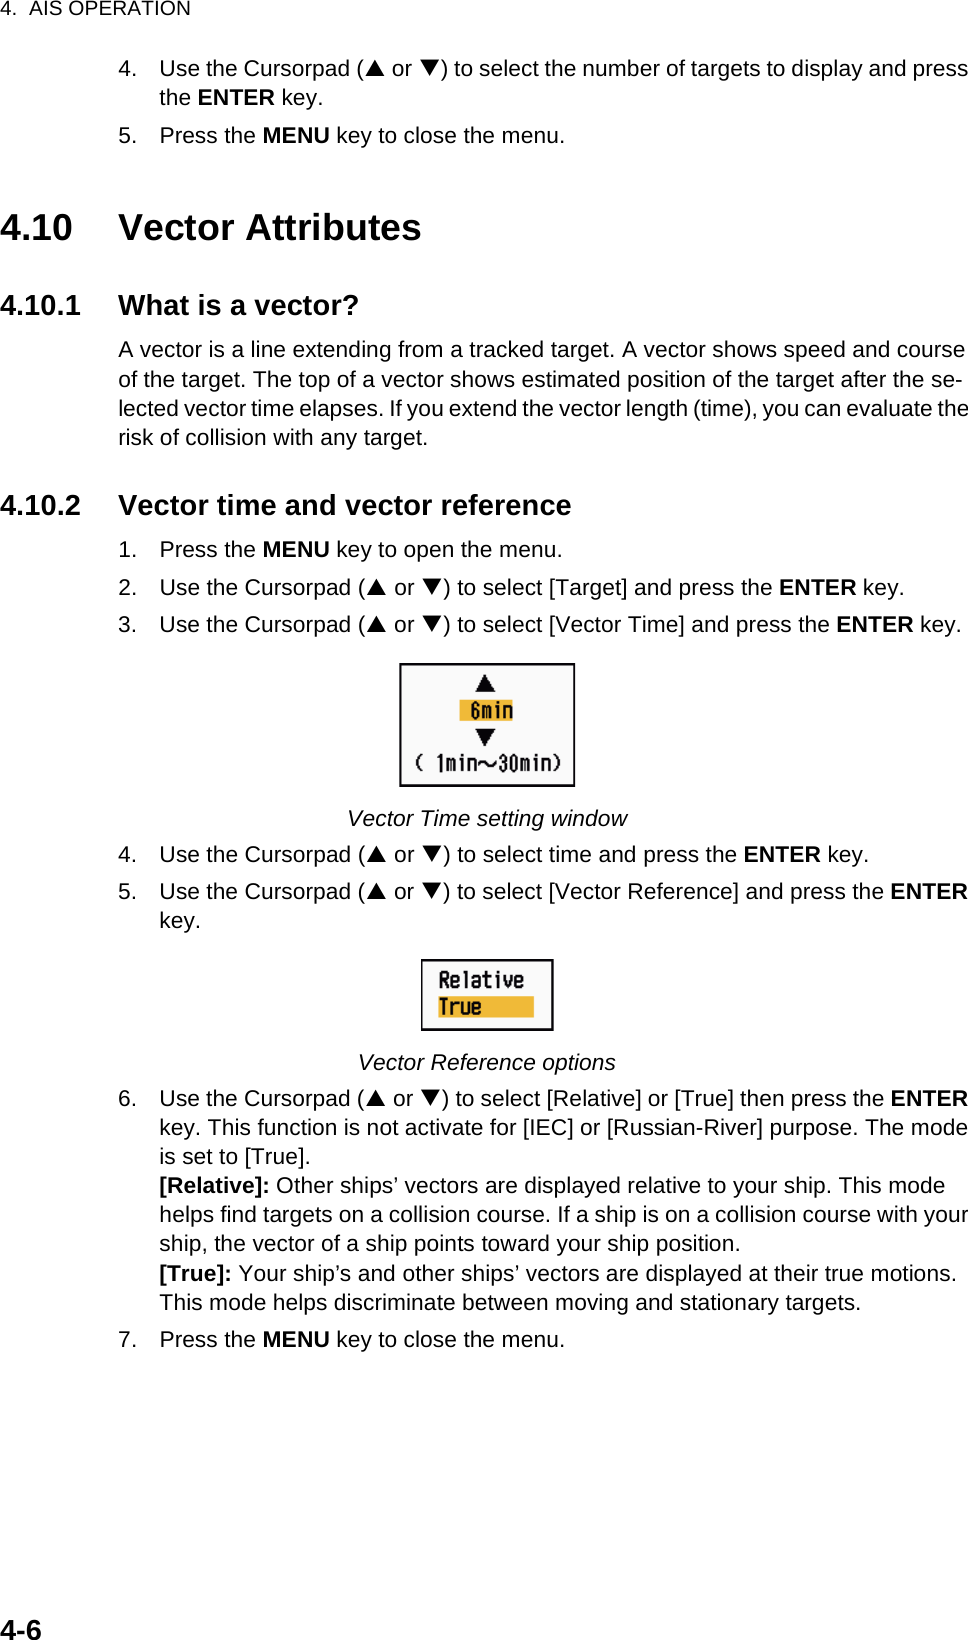 4.  AIS OPERATION4-64. Use the Cursorpad (S or T) to select the number of targets to display and press the ENTER key.5. Press the MENU key to close the menu.4.10 Vector Attributes4.10.1 What is a vector?A vector is a line extending from a tracked target. A vector shows speed and course of the target. The top of a vector shows estimated position of the target after the se-lected vector time elapses. If you extend the vector length (time), you can evaluate the risk of collision with any target.4.10.2 Vector time and vector reference1. Press the MENU key to open the menu.2. Use the Cursorpad (S or T) to select [Target] and press the ENTER key.3. Use the Cursorpad (S or T) to select [Vector Time] and press the ENTER key.Vector Time setting window4. Use the Cursorpad (S or T) to select time and press the ENTER key.5. Use the Cursorpad (S or T) to select [Vector Reference] and press the ENTER key.Vector Reference options6. Use the Cursorpad (S or T) to select [Relative] or [True] then press the ENTER key. This function is not activate for [IEC] or [Russian-River] purpose. The mode is set to [True].[Relative]: Other ships’ vectors are displayed relative to your ship. This mode helps find targets on a collision course. If a ship is on a collision course with your ship, the vector of a ship points toward your ship position.[True]: Your ship’s and other ships’ vectors are displayed at their true motions. This mode helps discriminate between moving and stationary targets.7. Press the MENU key to close the menu.